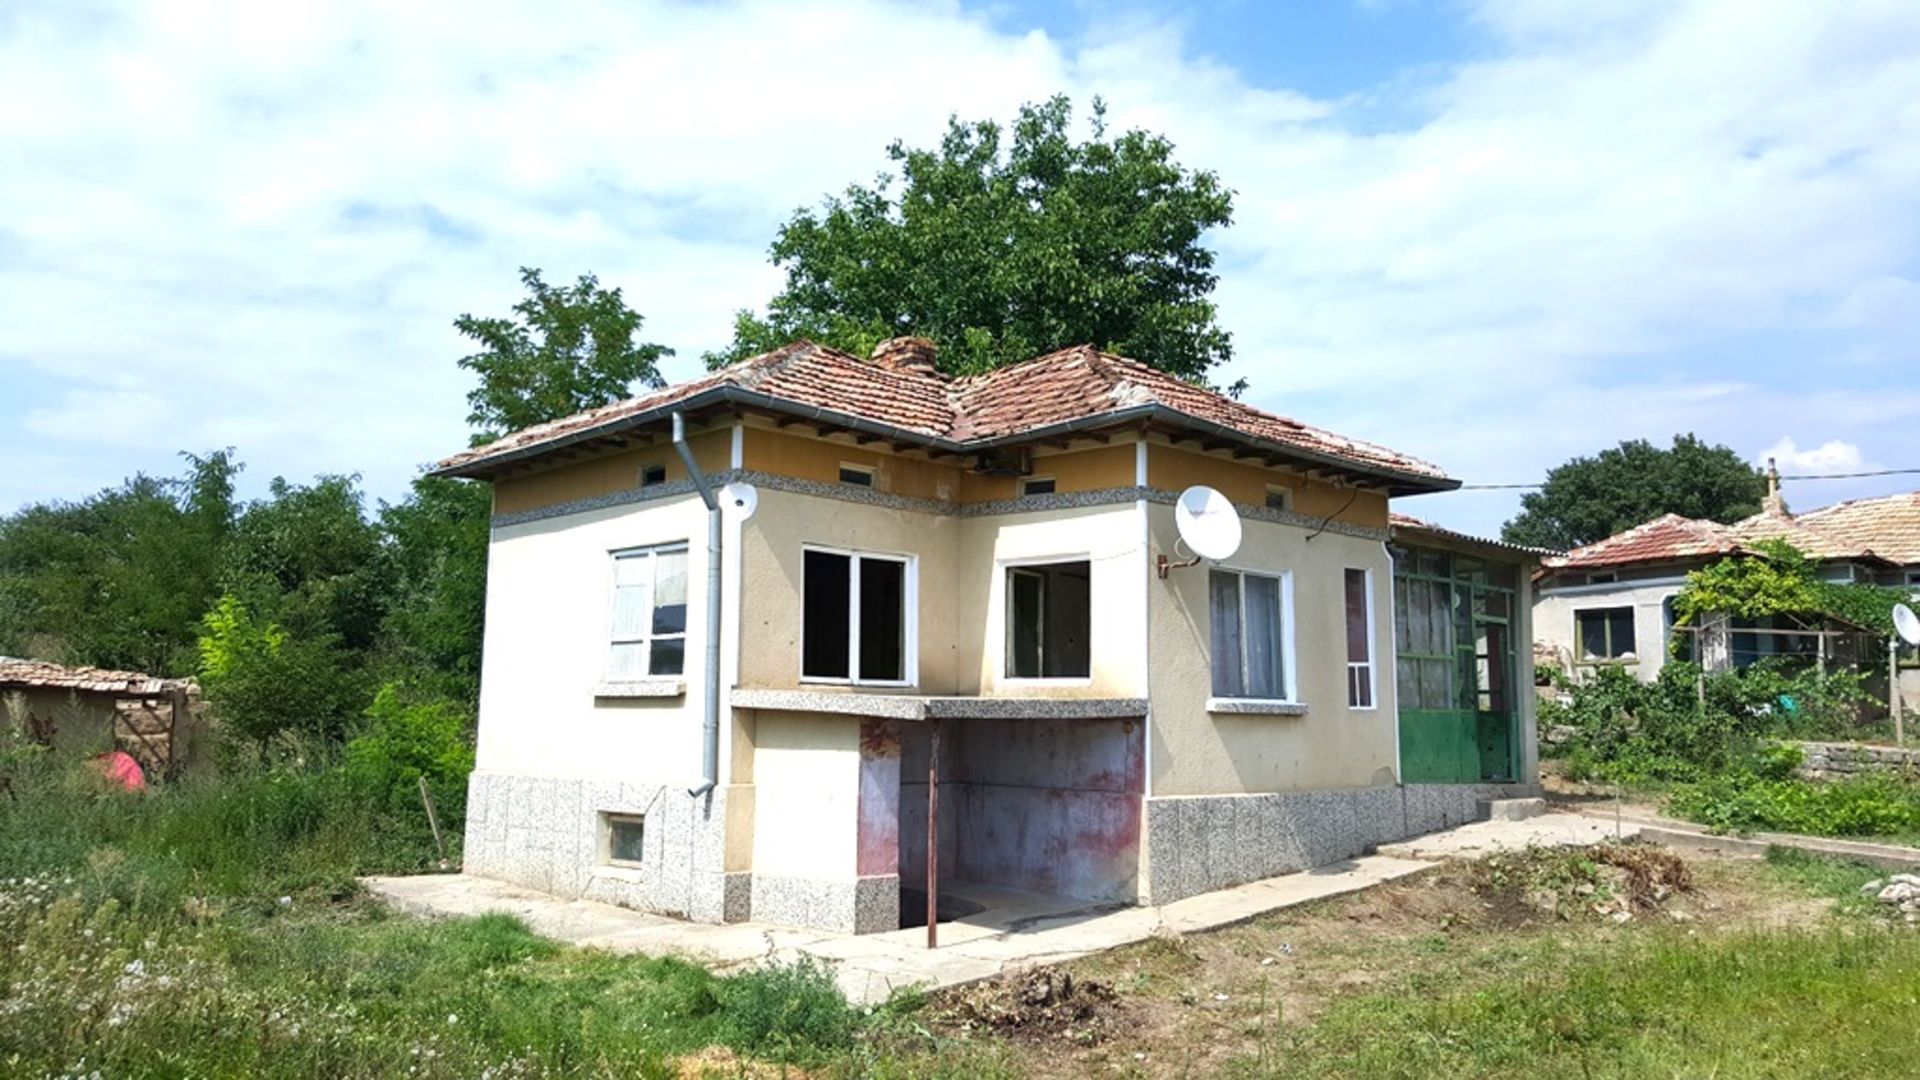 SUNFLOWER COTTAGE IN KRASEN, BULGARIA  - 30 miles from Beach! - Image 3 of 64